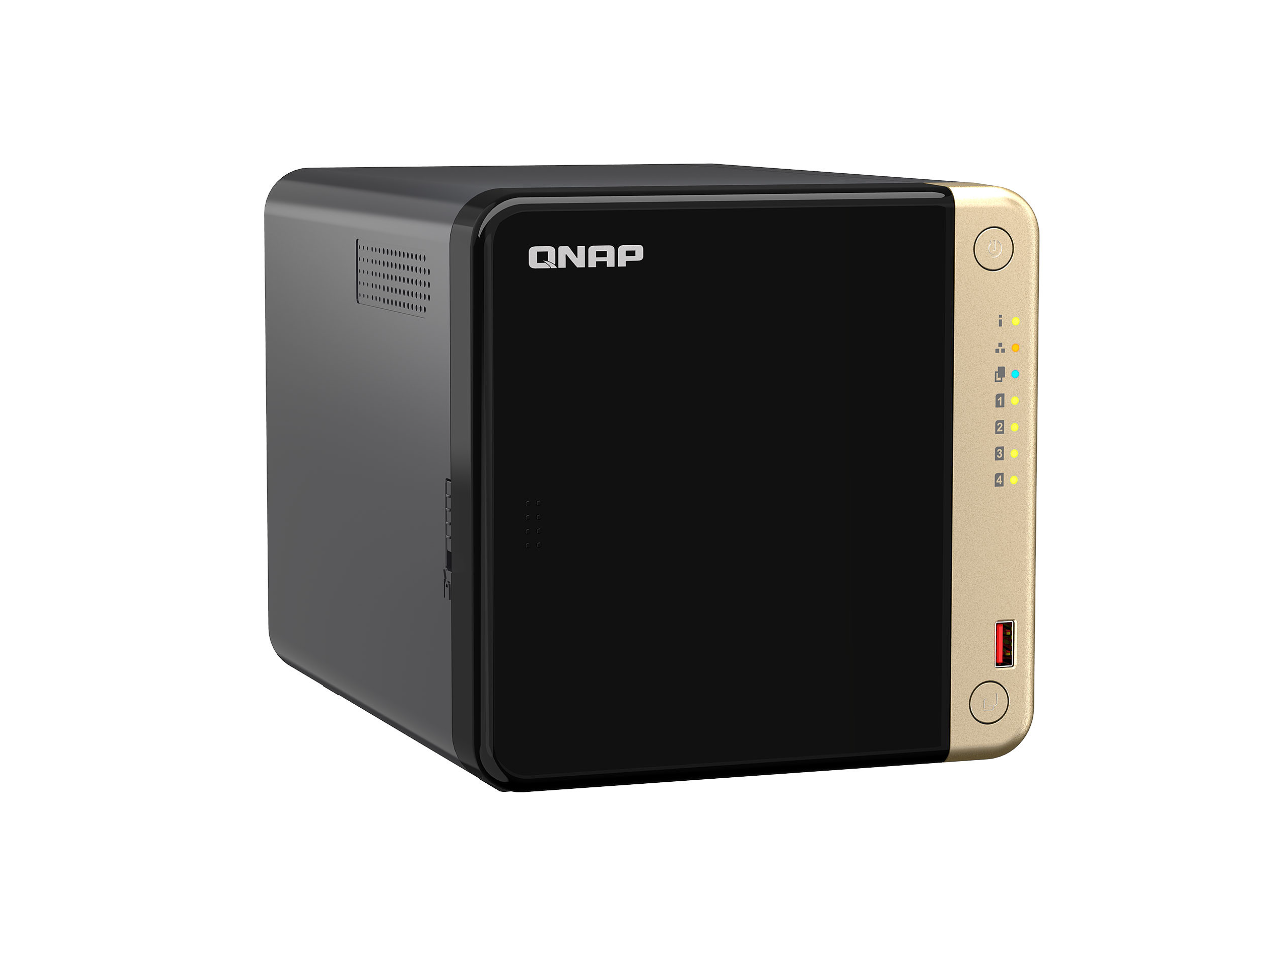 QNAP TS-464 4-Bay NAS with 8GB RAM, 500GB (2 x 250GB) NVME Cache, and 16TB (4 x 4TB) of Western Digital Red Plus Drives Fully Assembled and Tested